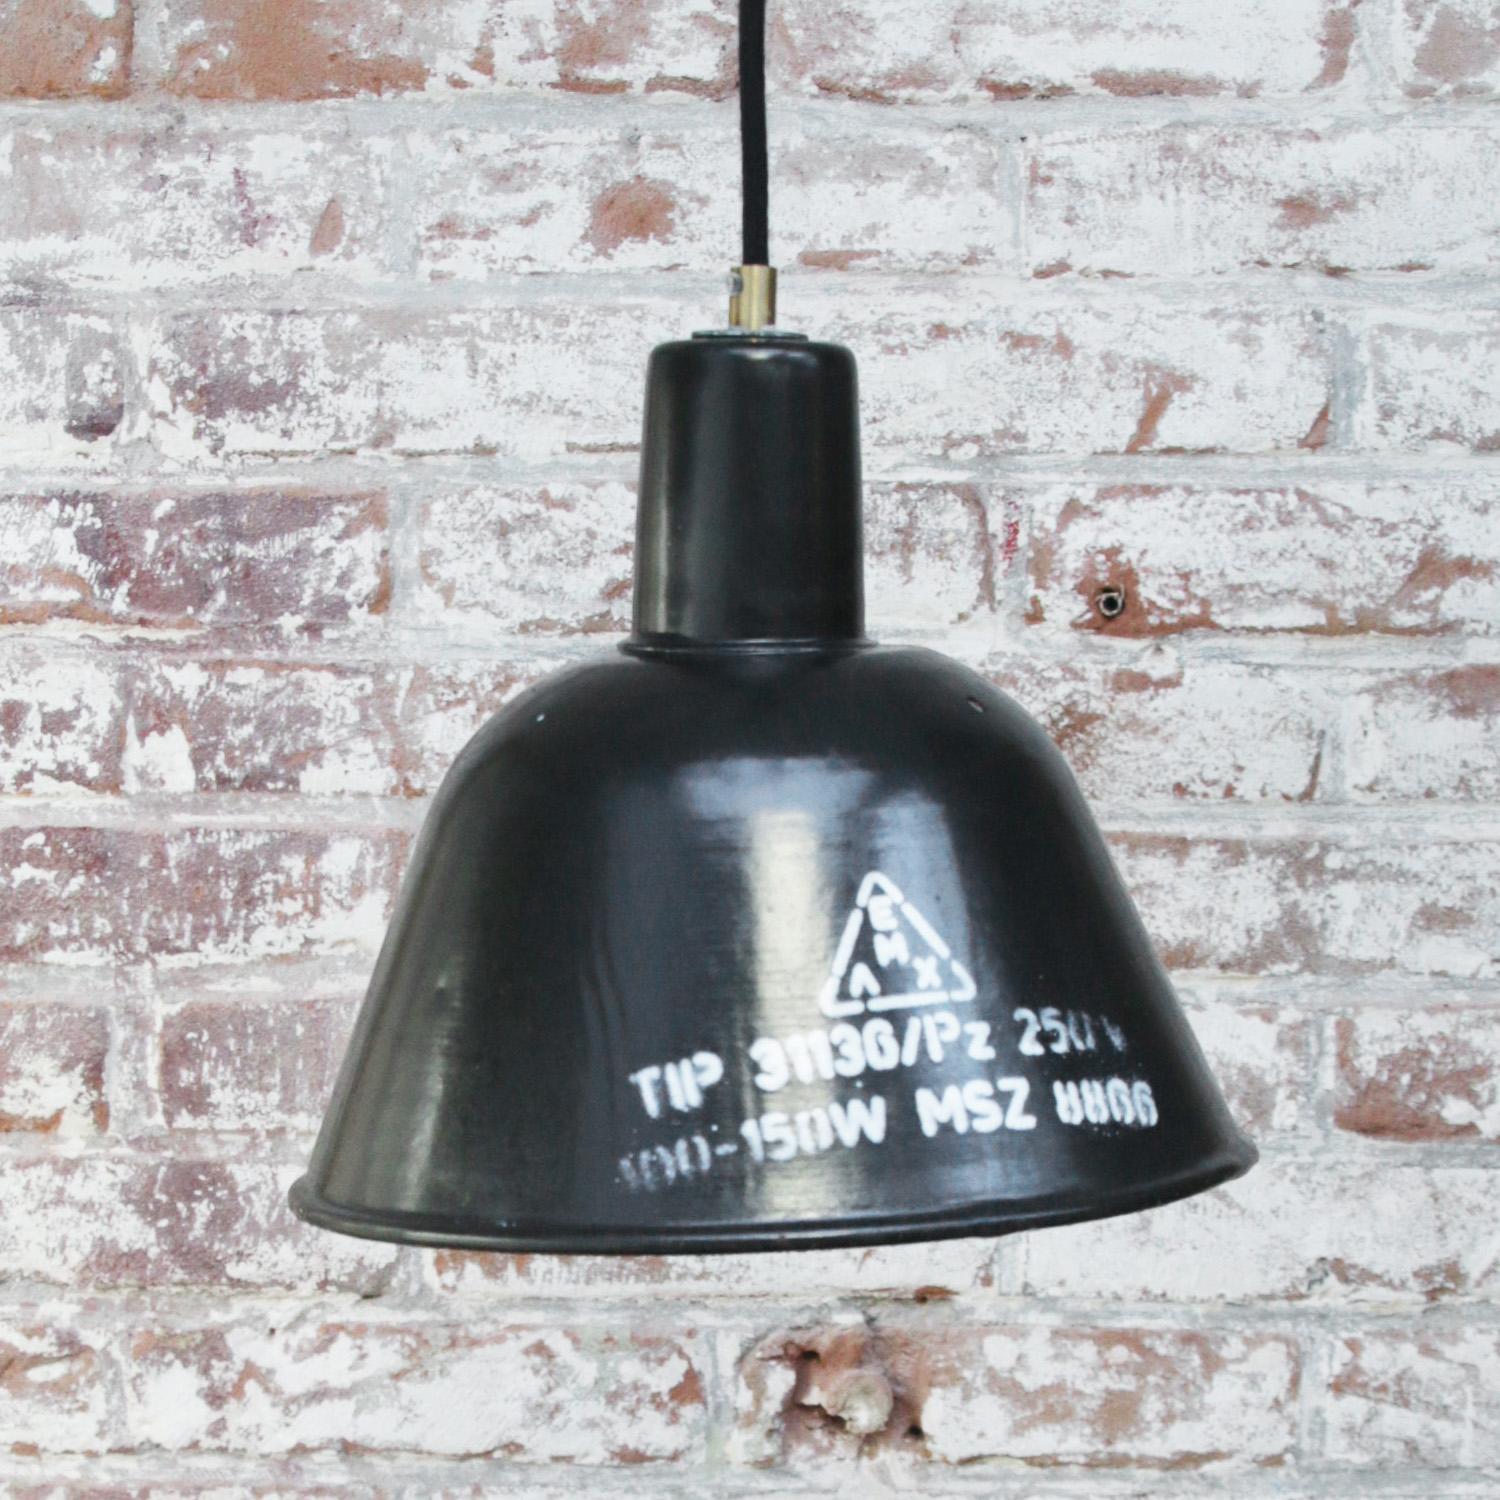 Black Enamel Vintage Industrial Factory Pendant Lights In Good Condition For Sale In Amsterdam, NL